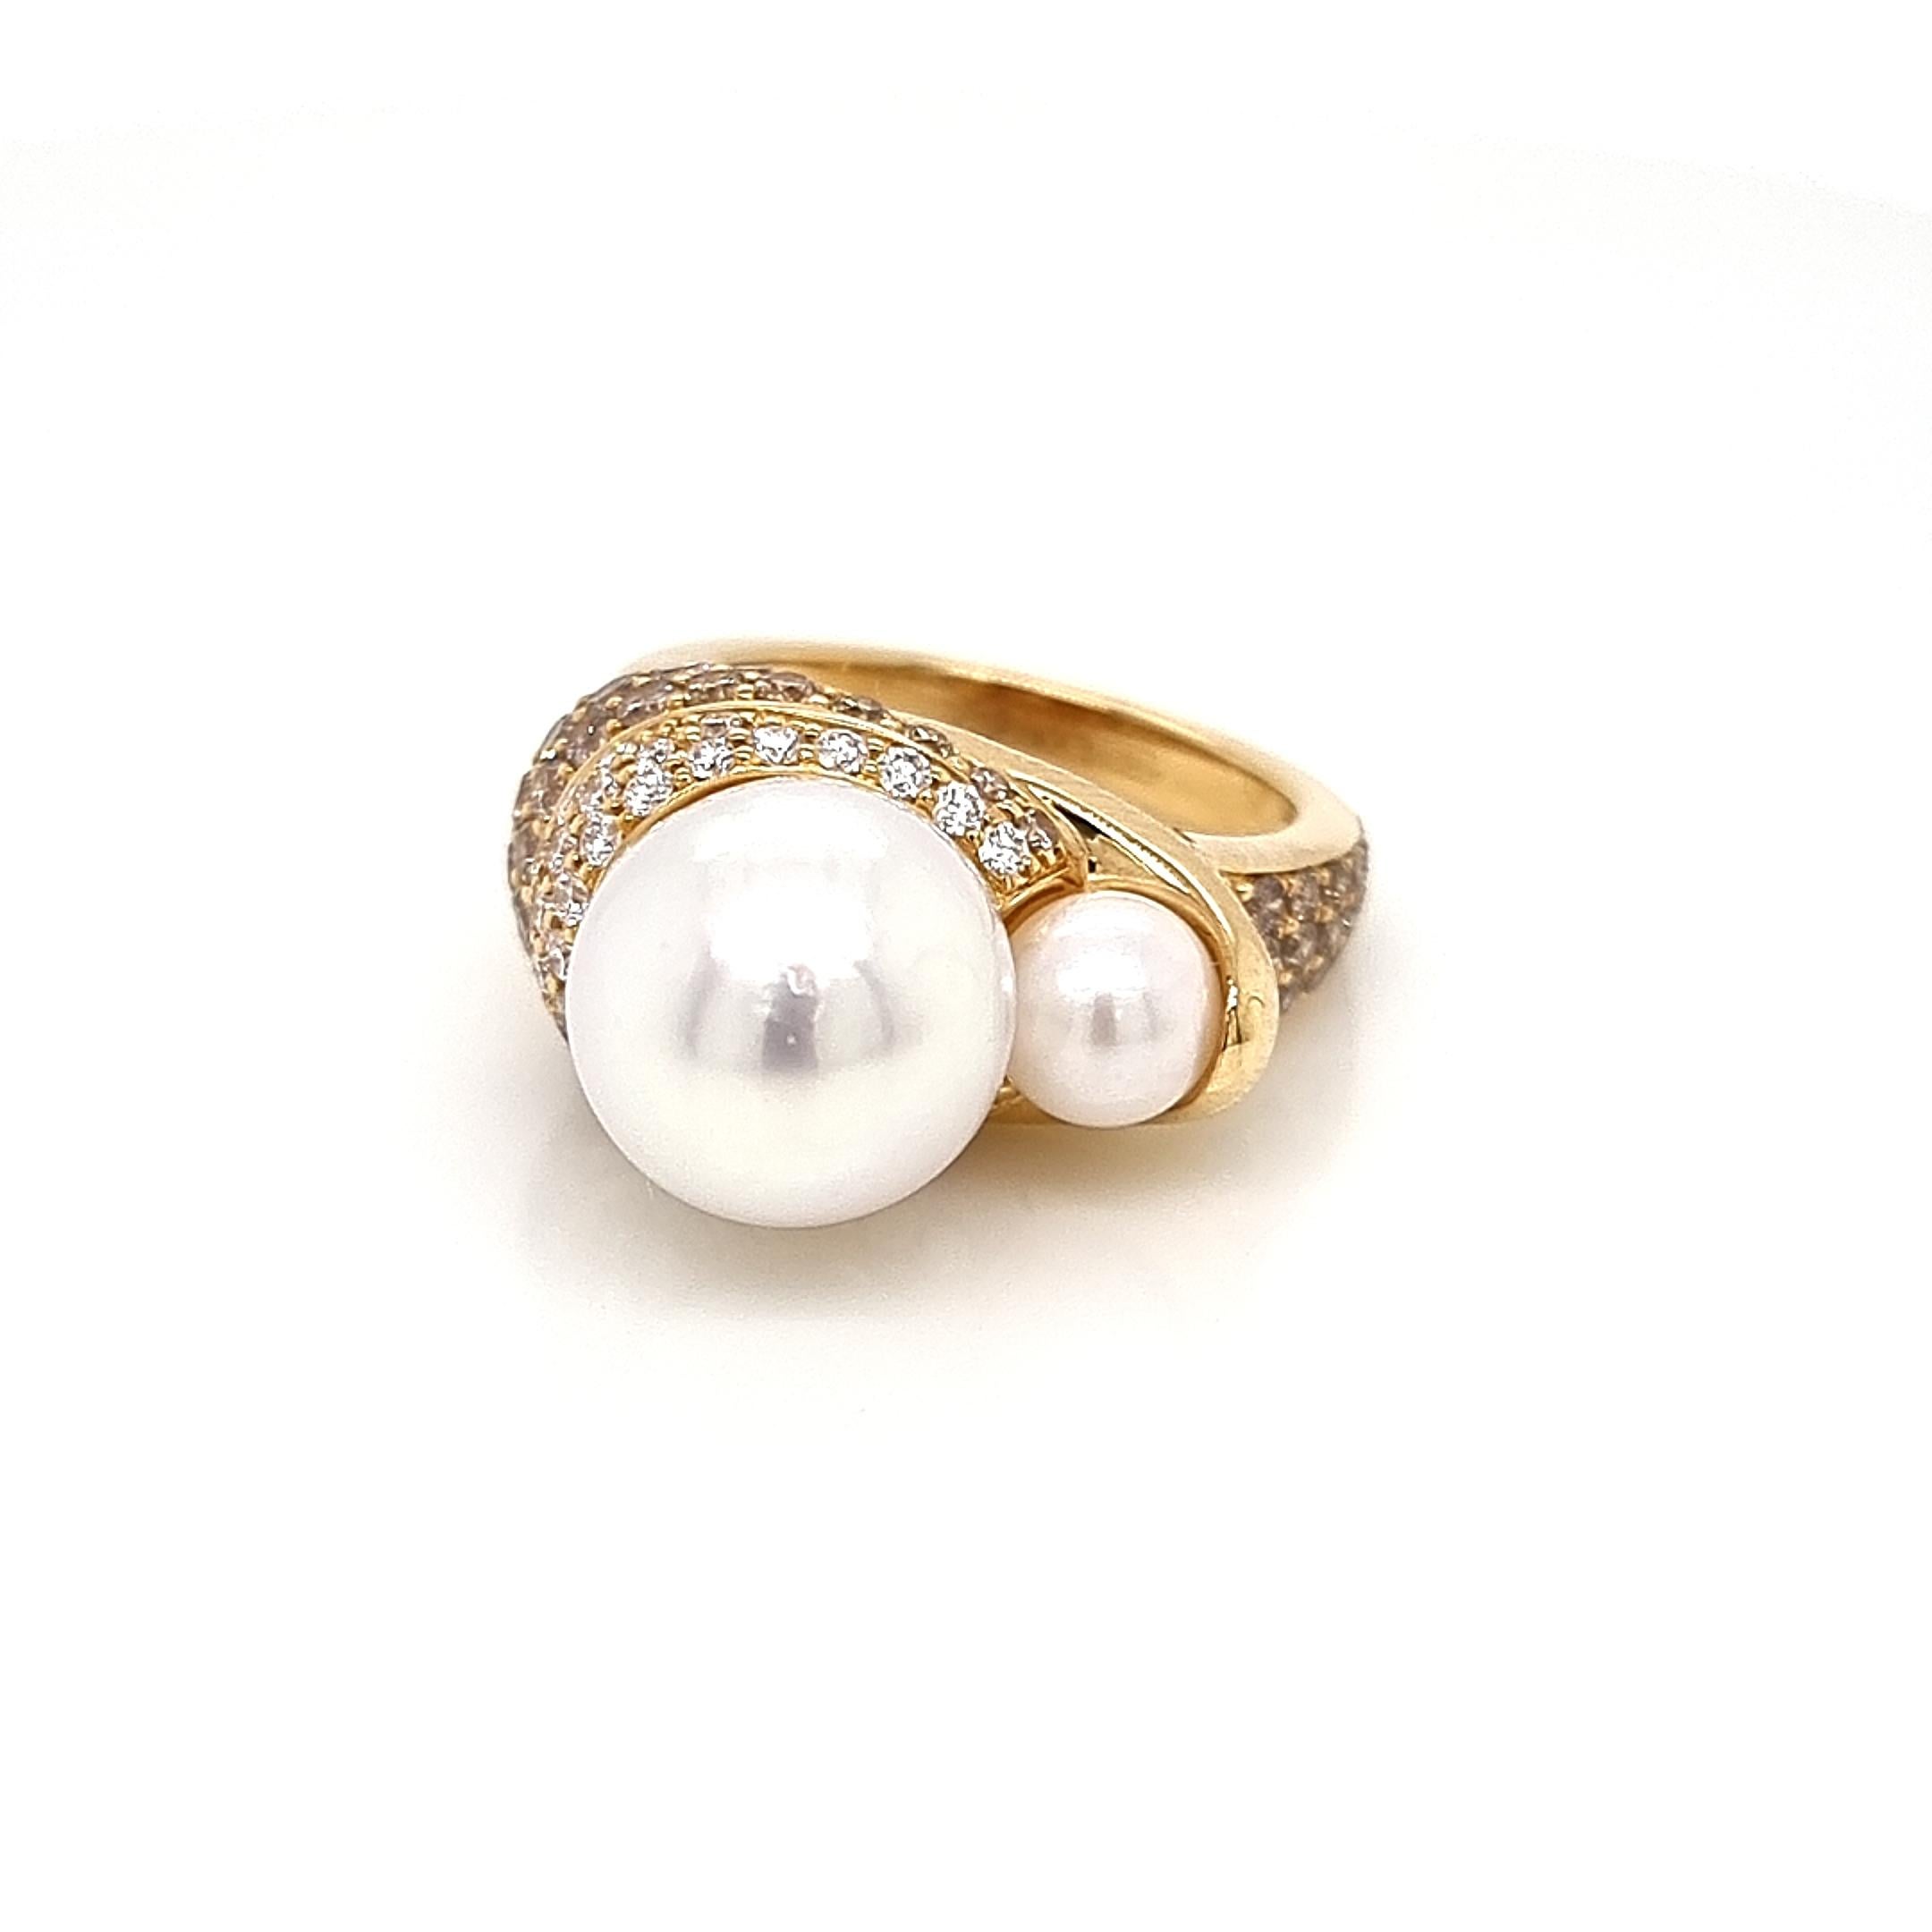 Natural Pearl collection by VOTIVE.

Step into the world of VOTIVE's Natural Pearl collection, where nature's timeless beauty is celebrated in every creation. The Dutches Ring, a masterpiece in this collection, showcases two stunning white pearls,